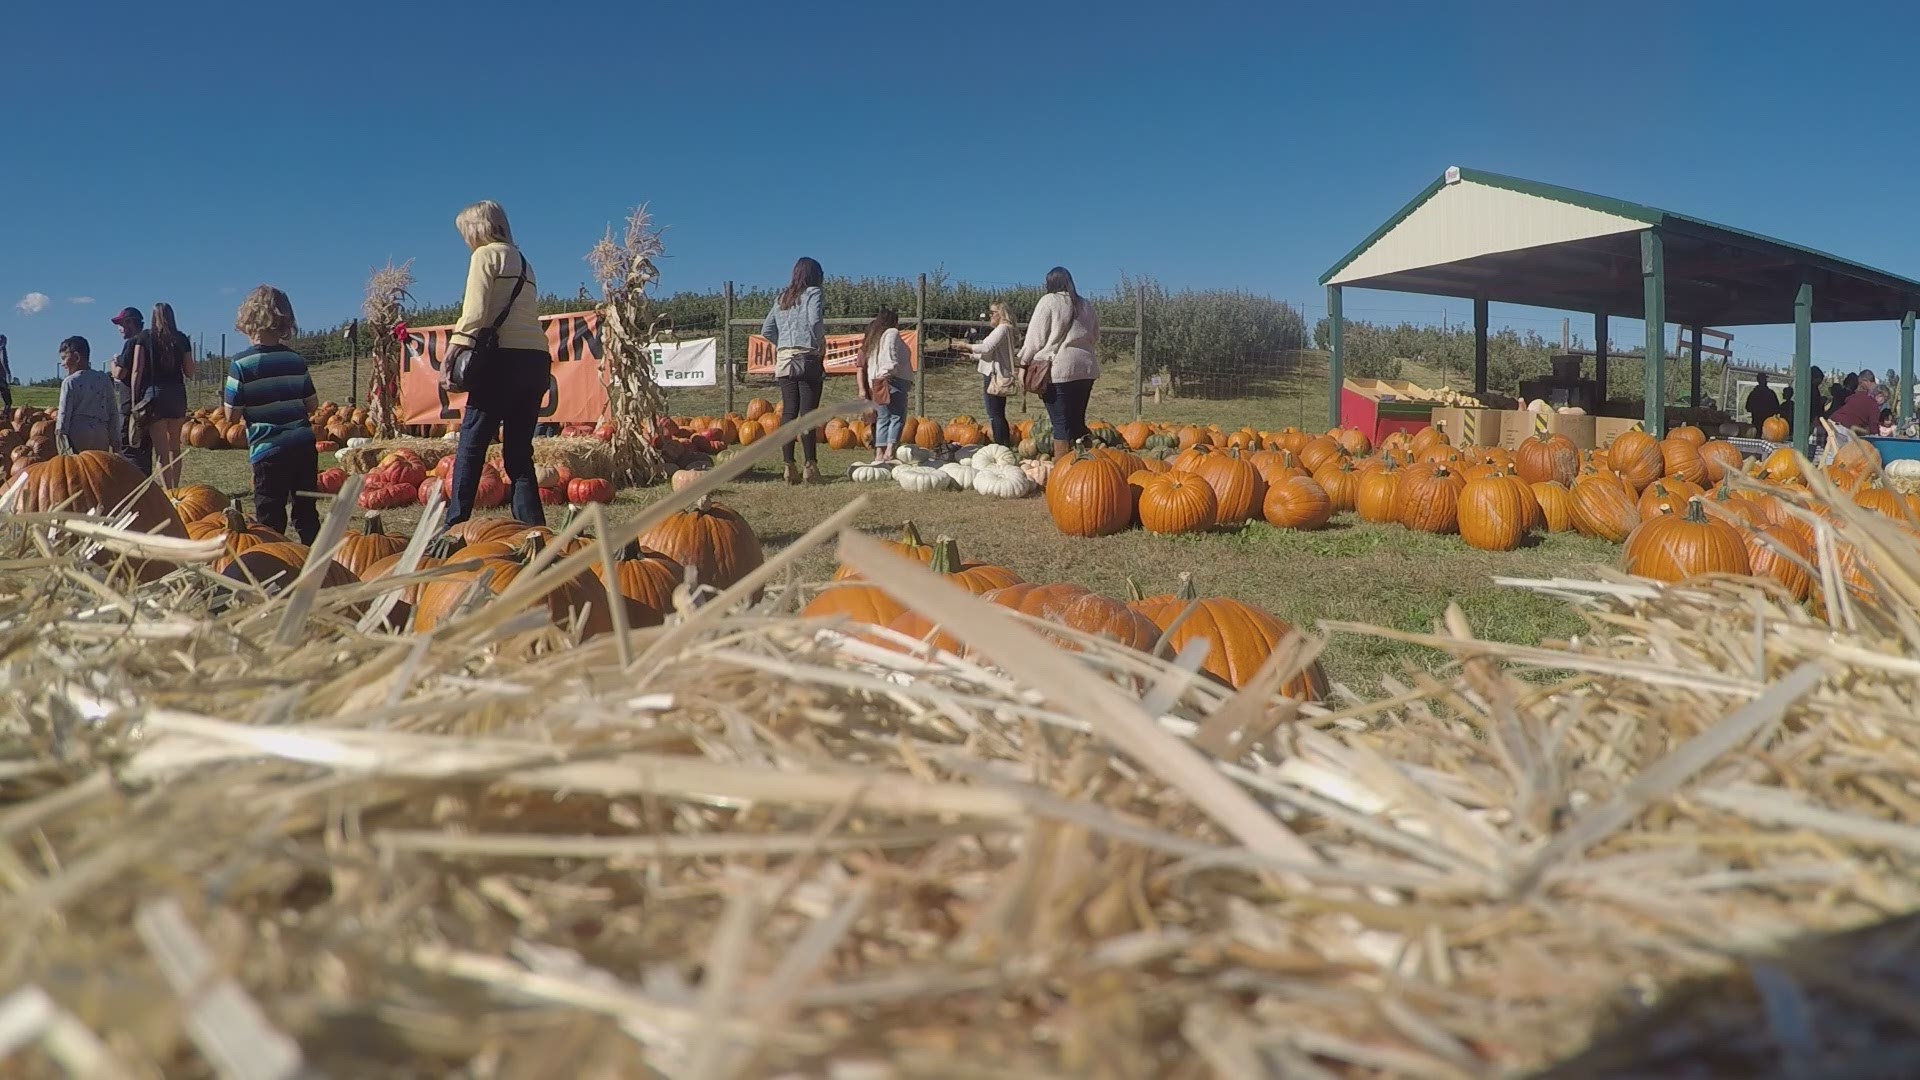 Fall festivals are underway as the season is jumping into full swing. As most events in 2020, pumpkin patches and corn mazes are looking different as well.